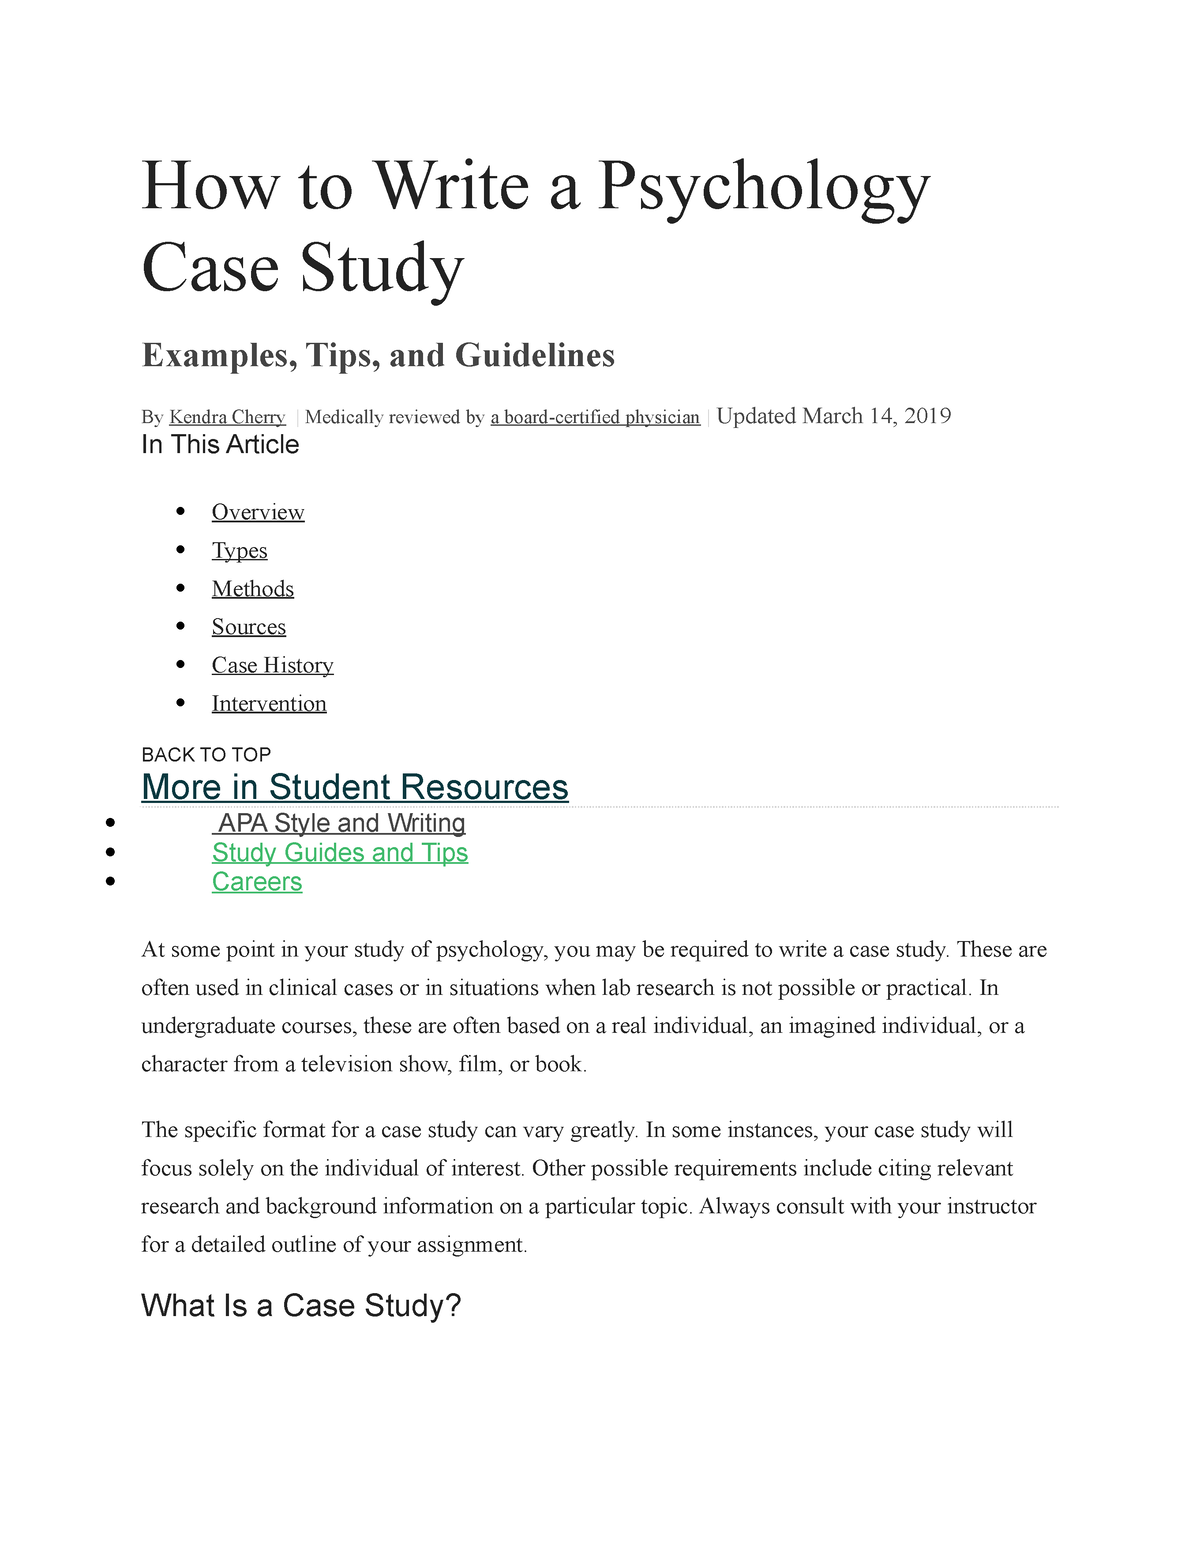 purpose of a case study in psychology